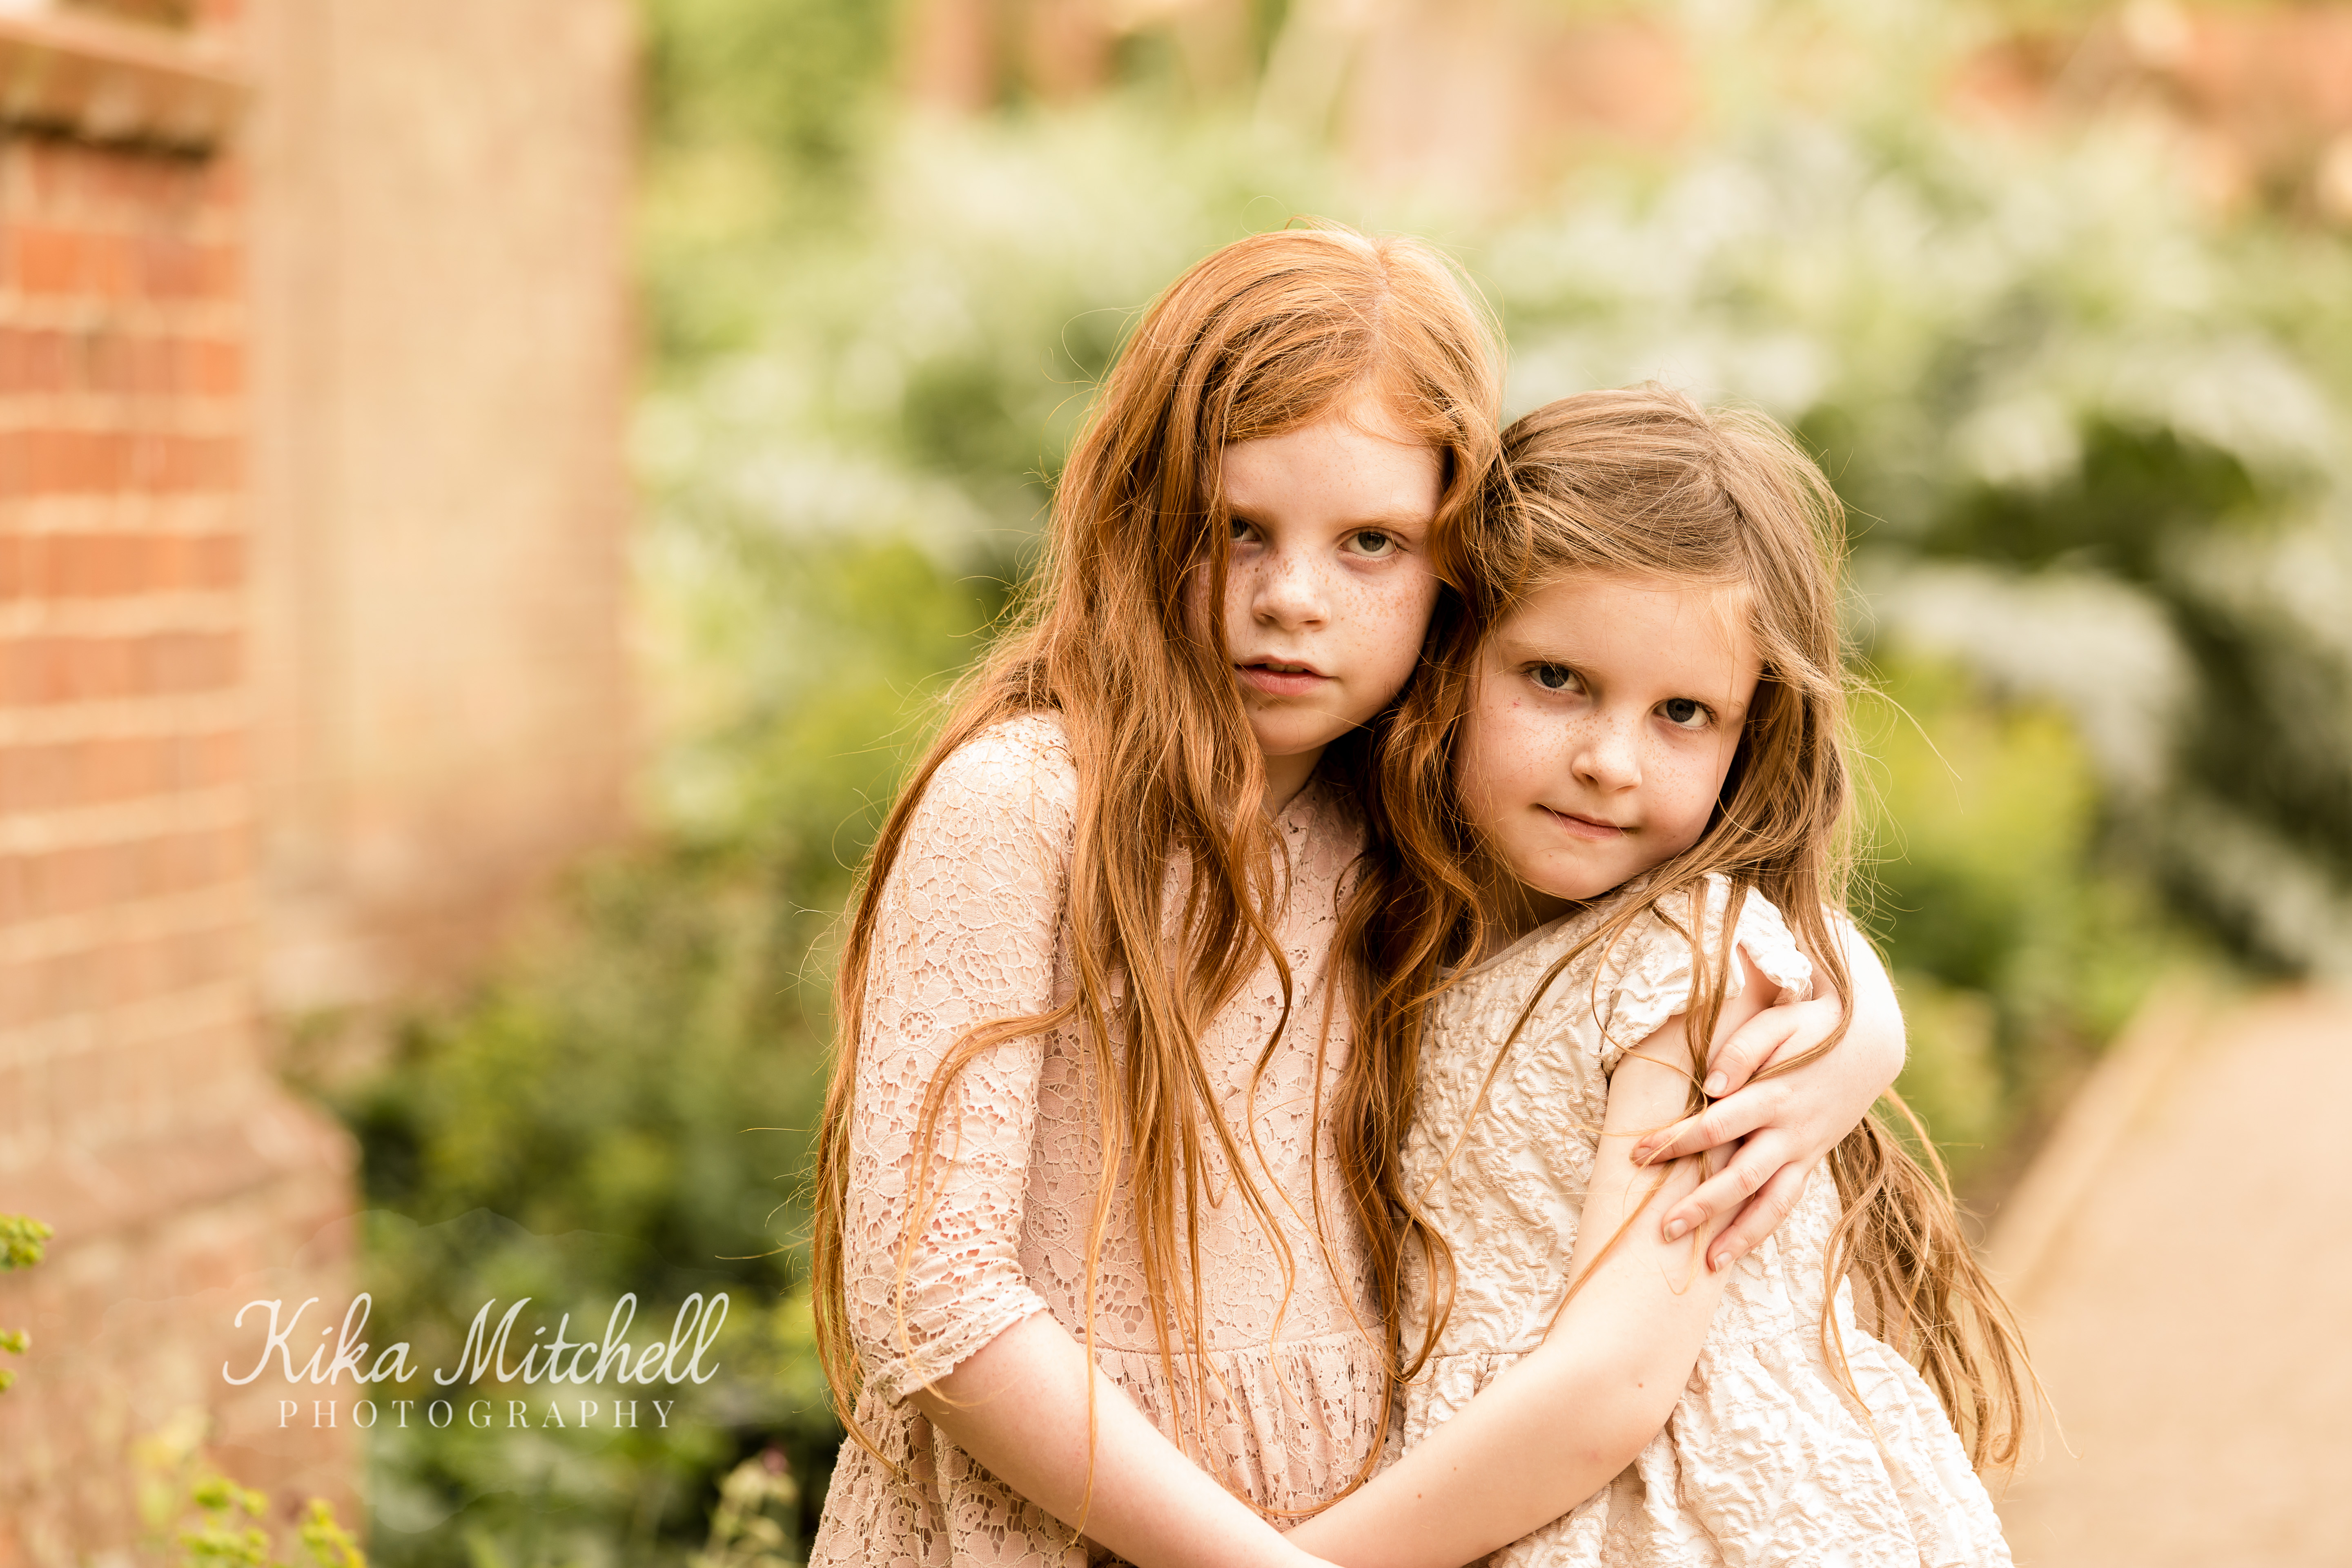 Gingerlillytea sisters at Audley End House and gardens for CEWE photoworld event by Chelmsford Photographer Kika Mitchell Photographer